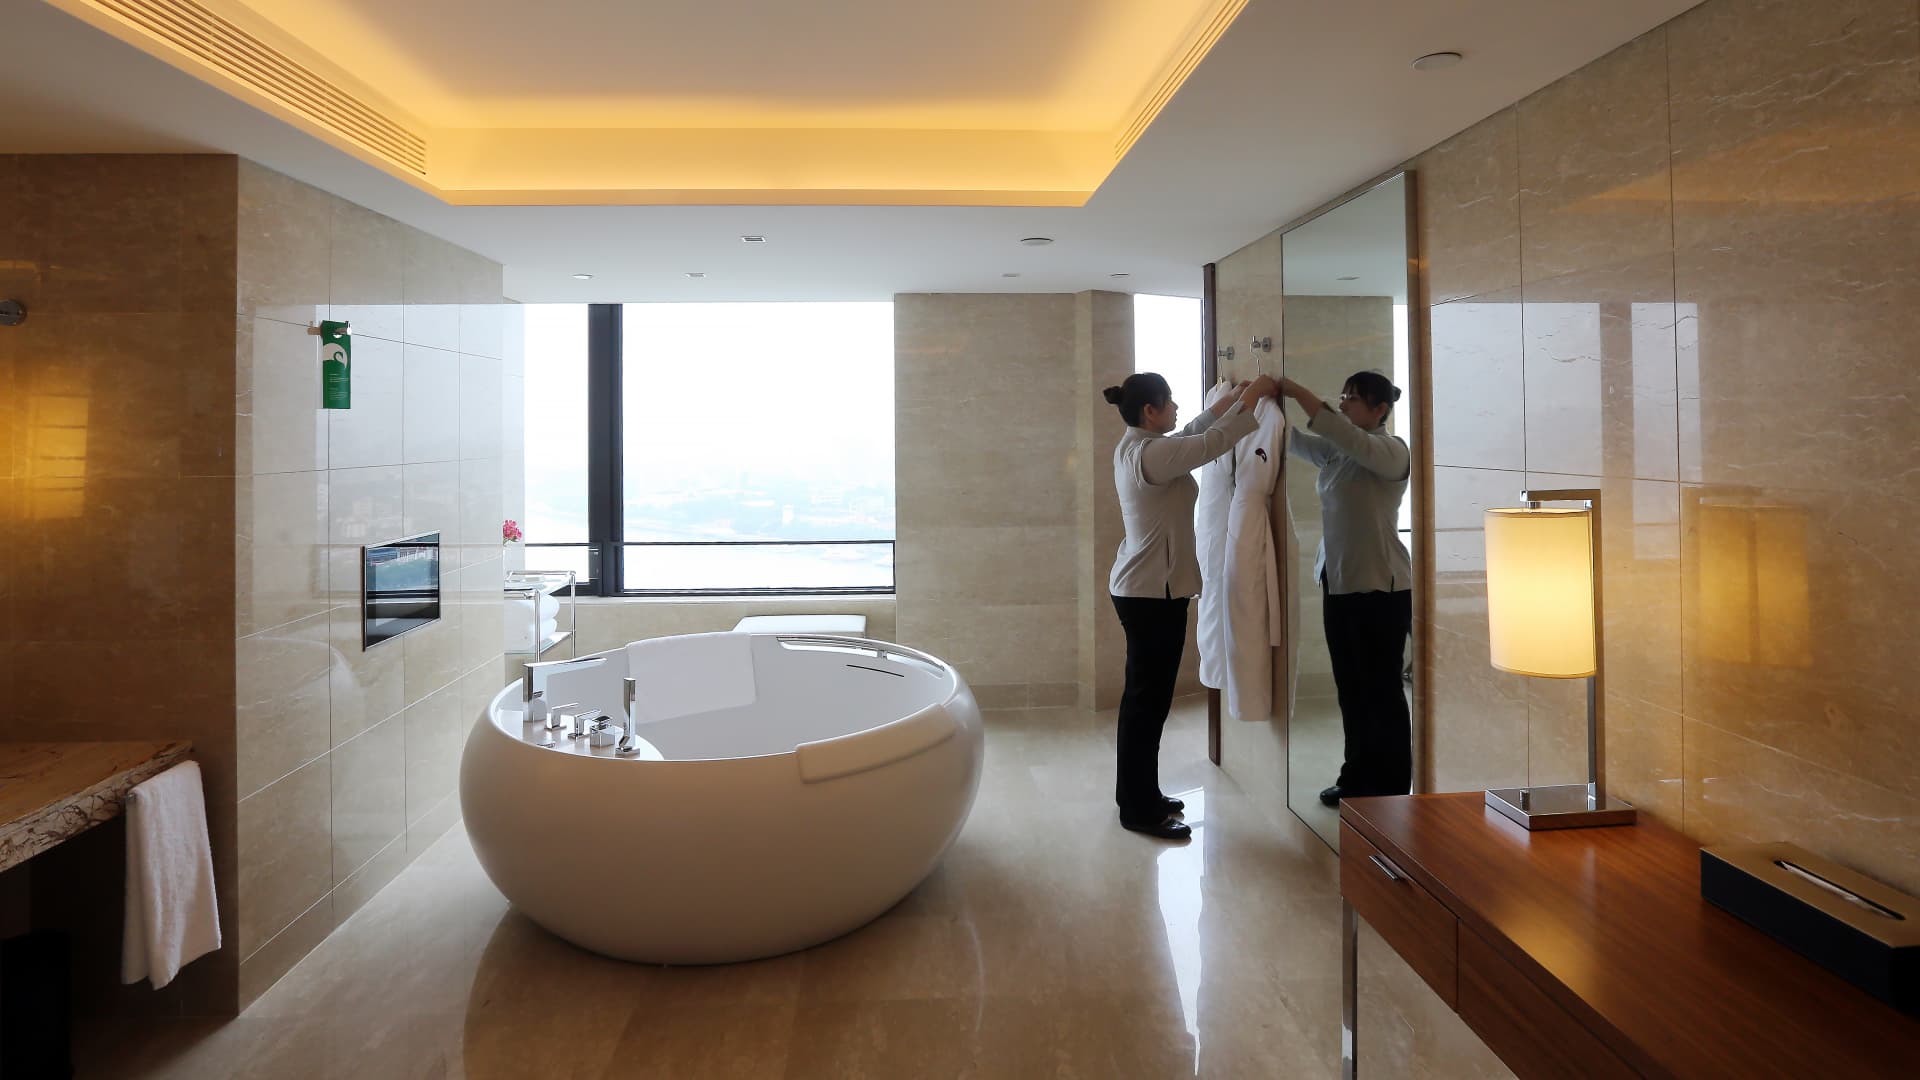 What do Chinese travelers want? Luxury ‘star-rated’ hotels, says new survey